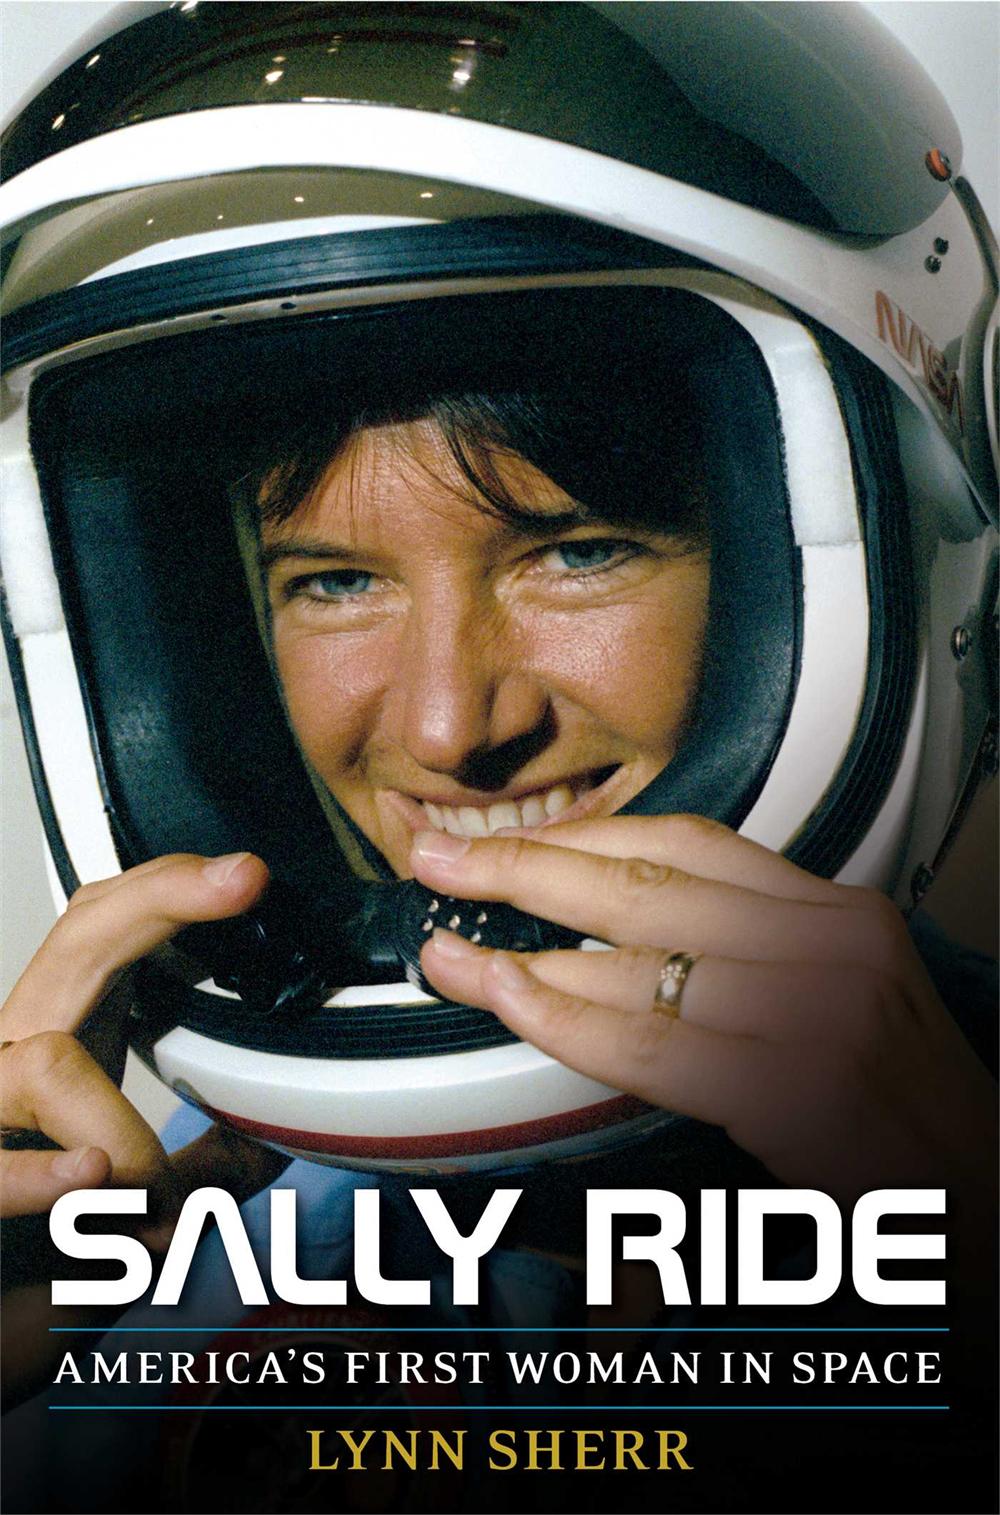 Cover of biography of Sally Ride